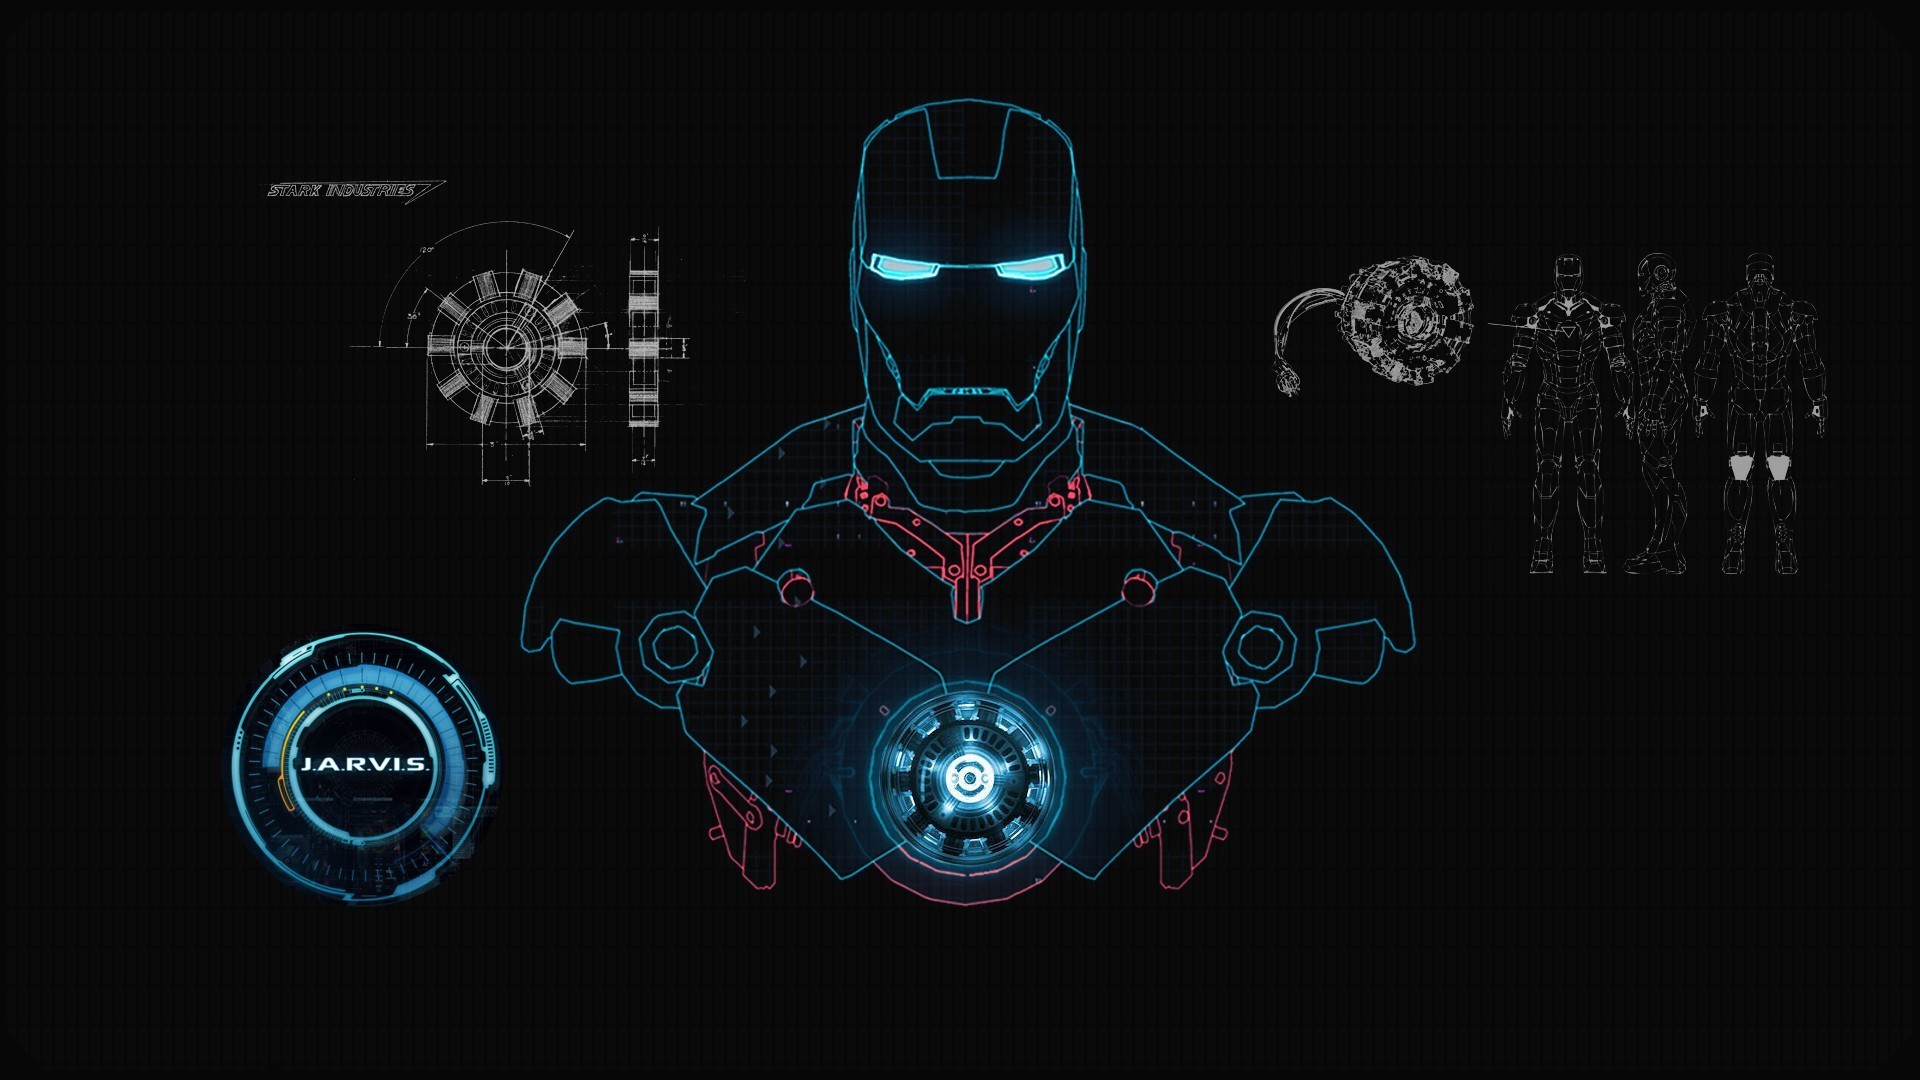 Best Iron Man wallpapers for phone screen